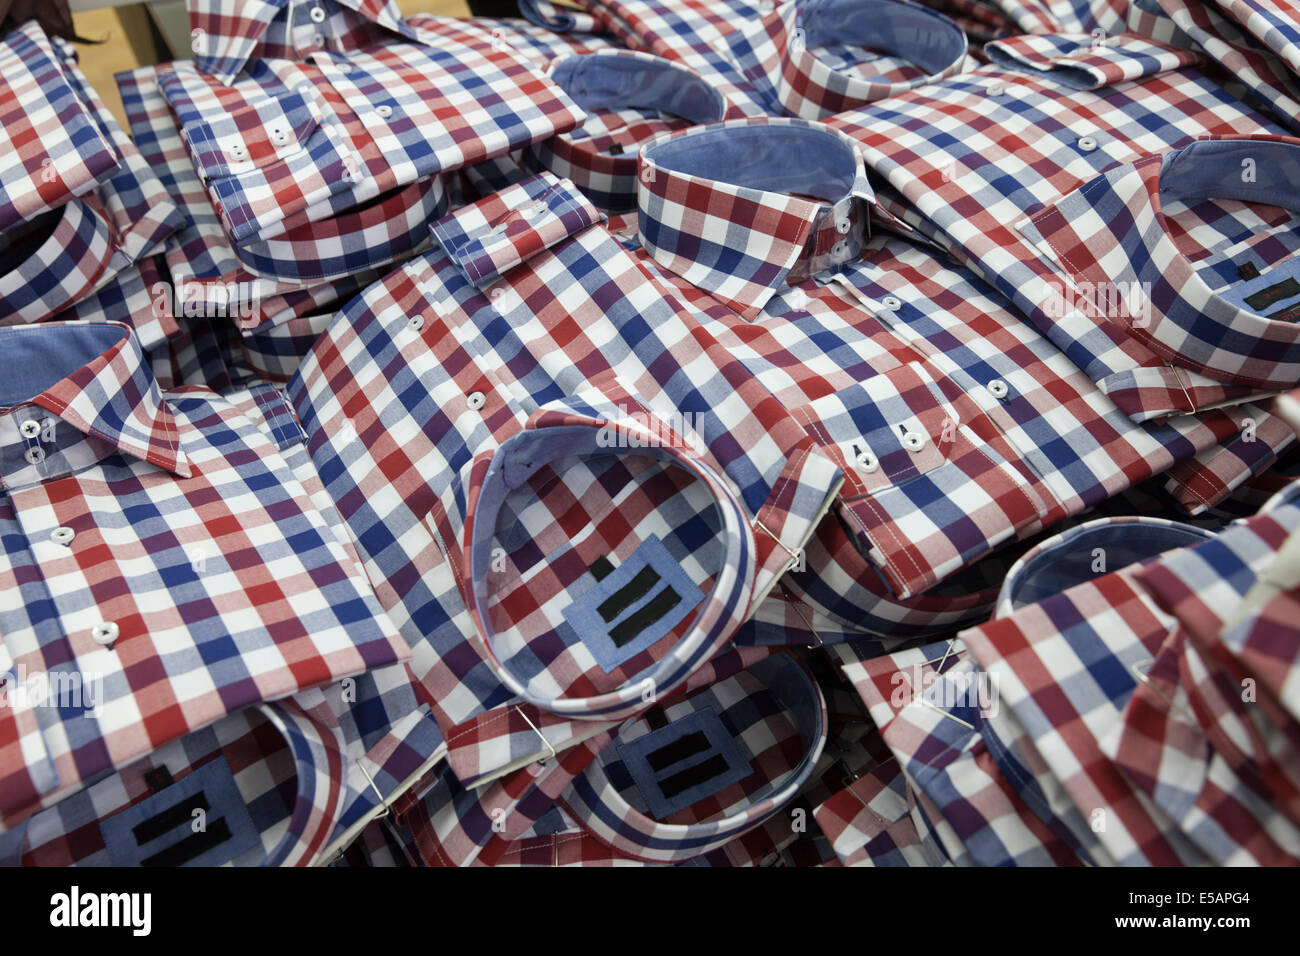 shirts in the production process stacked on a pile Stock Photo